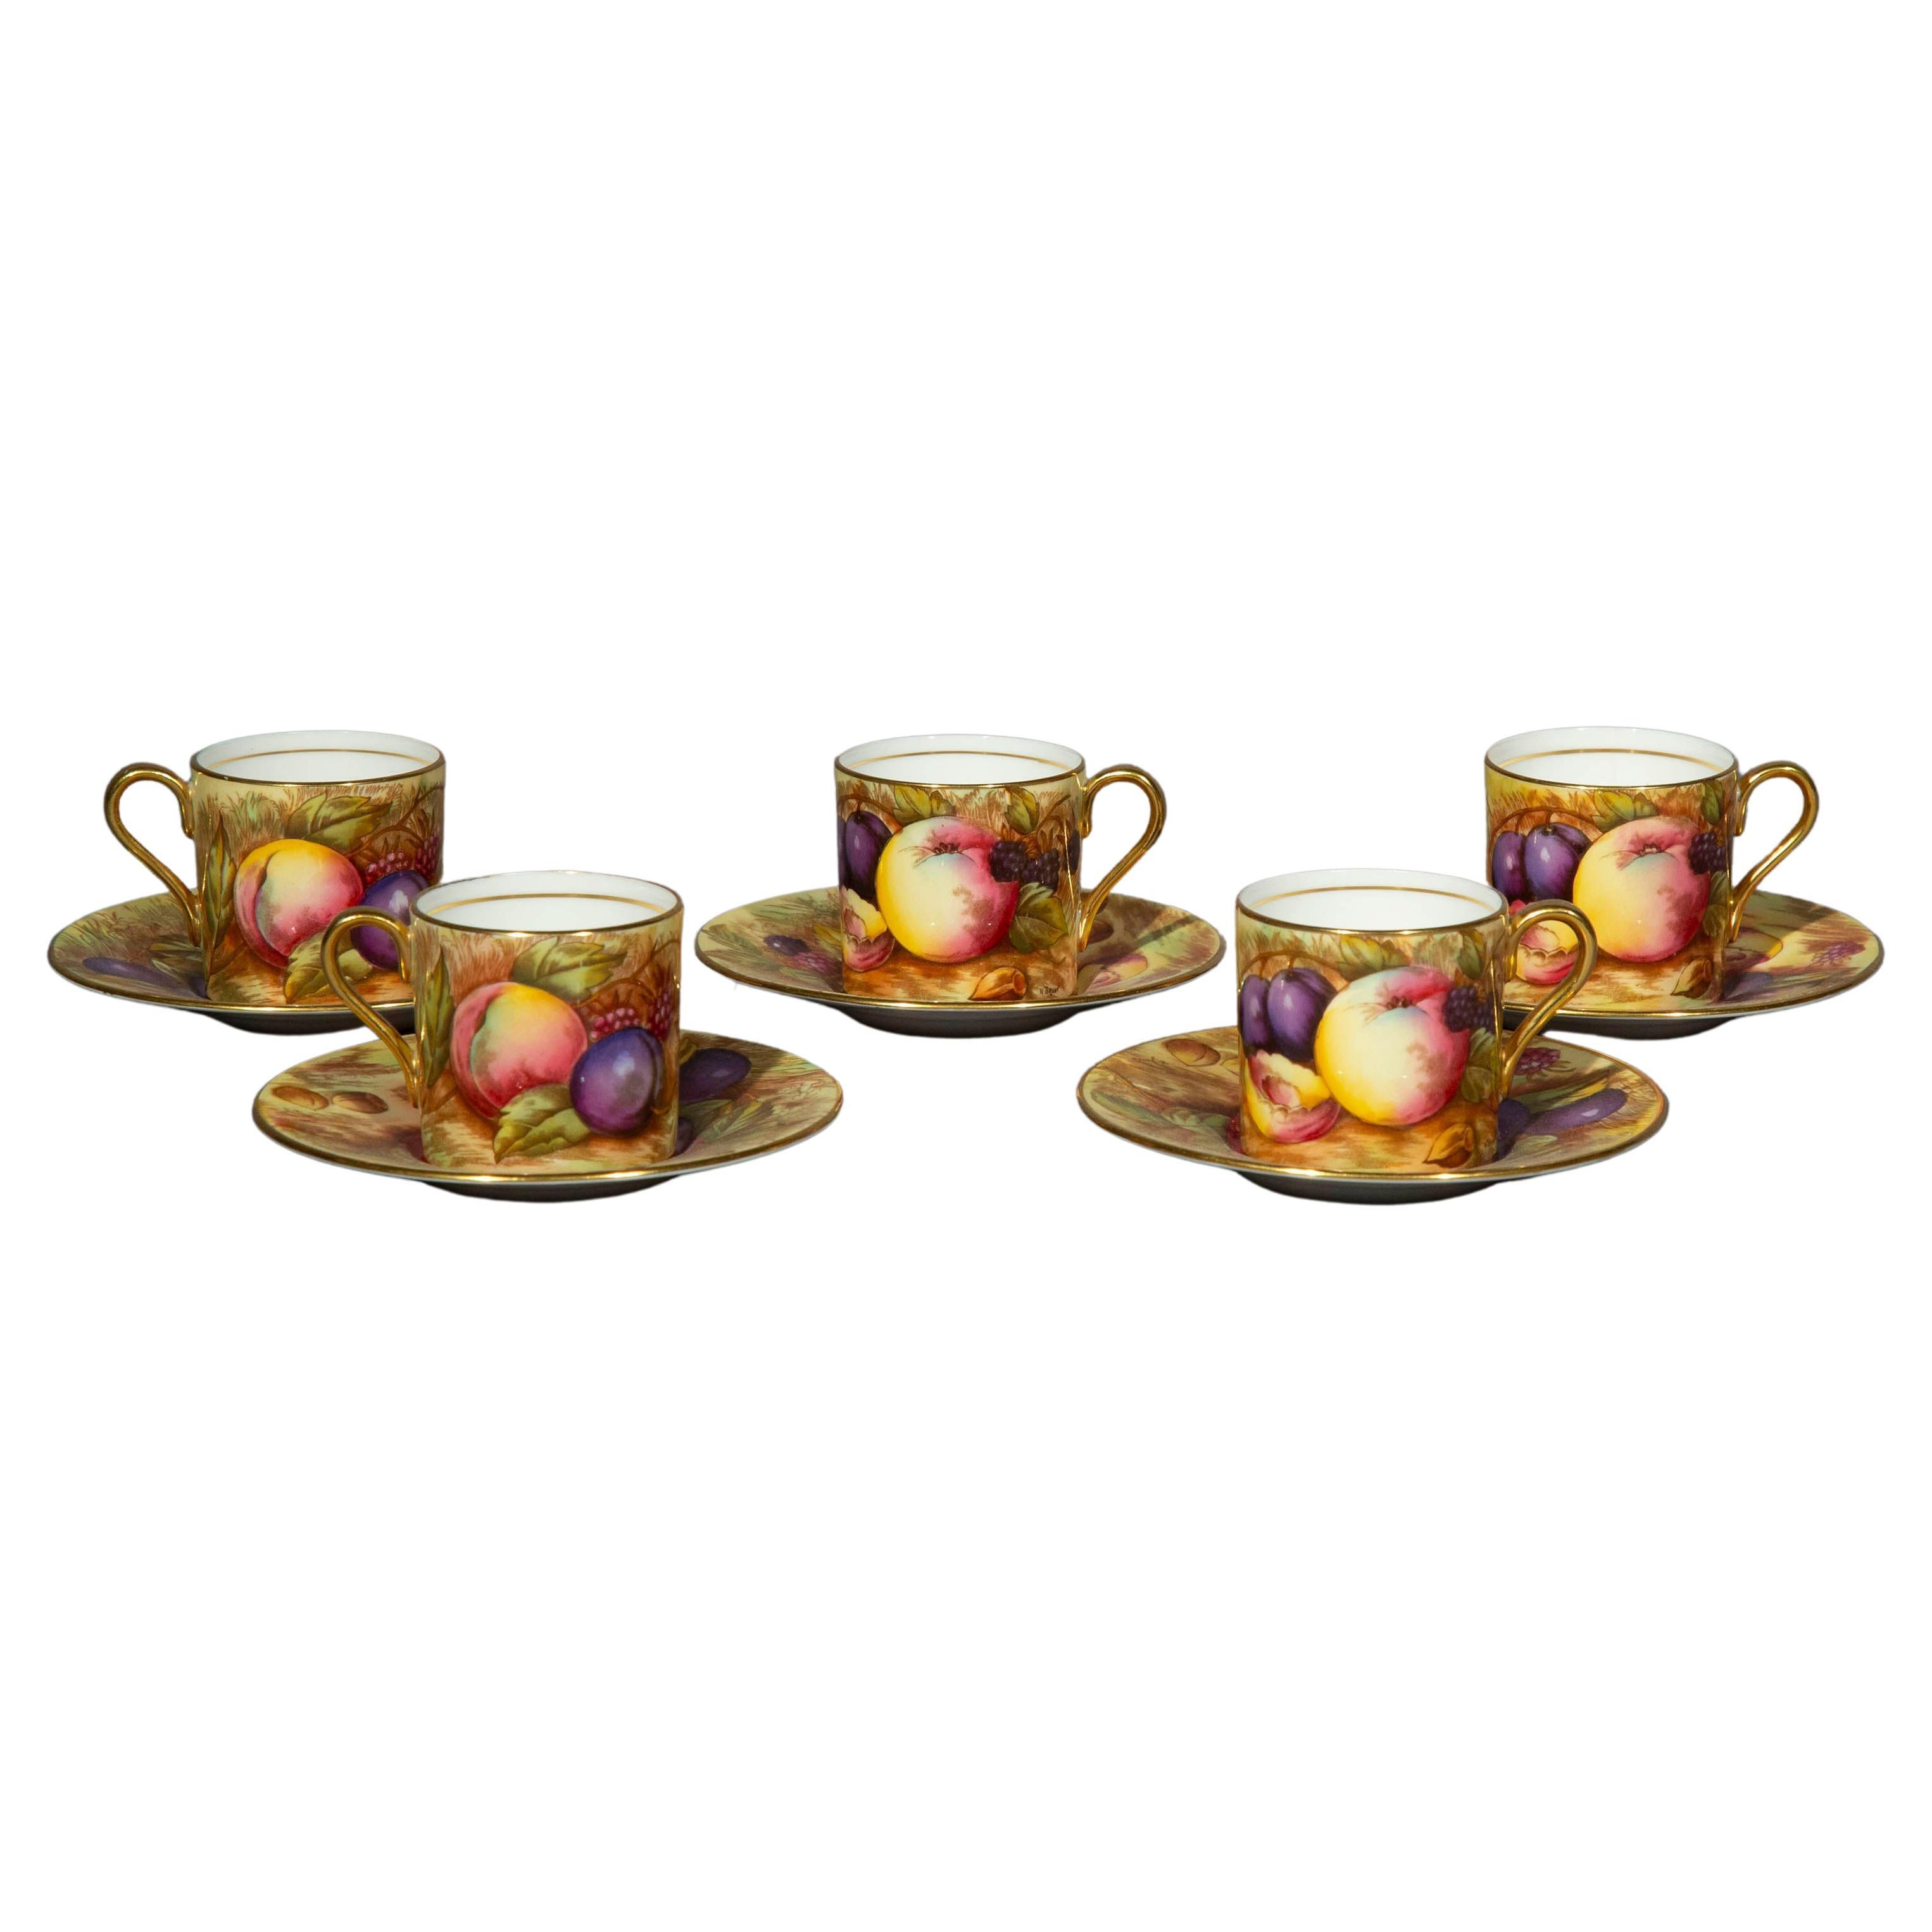 Set of Five Aynsley Porcelain Painted Coffee Cups and Saucers, Signed N.Brunt For Sale